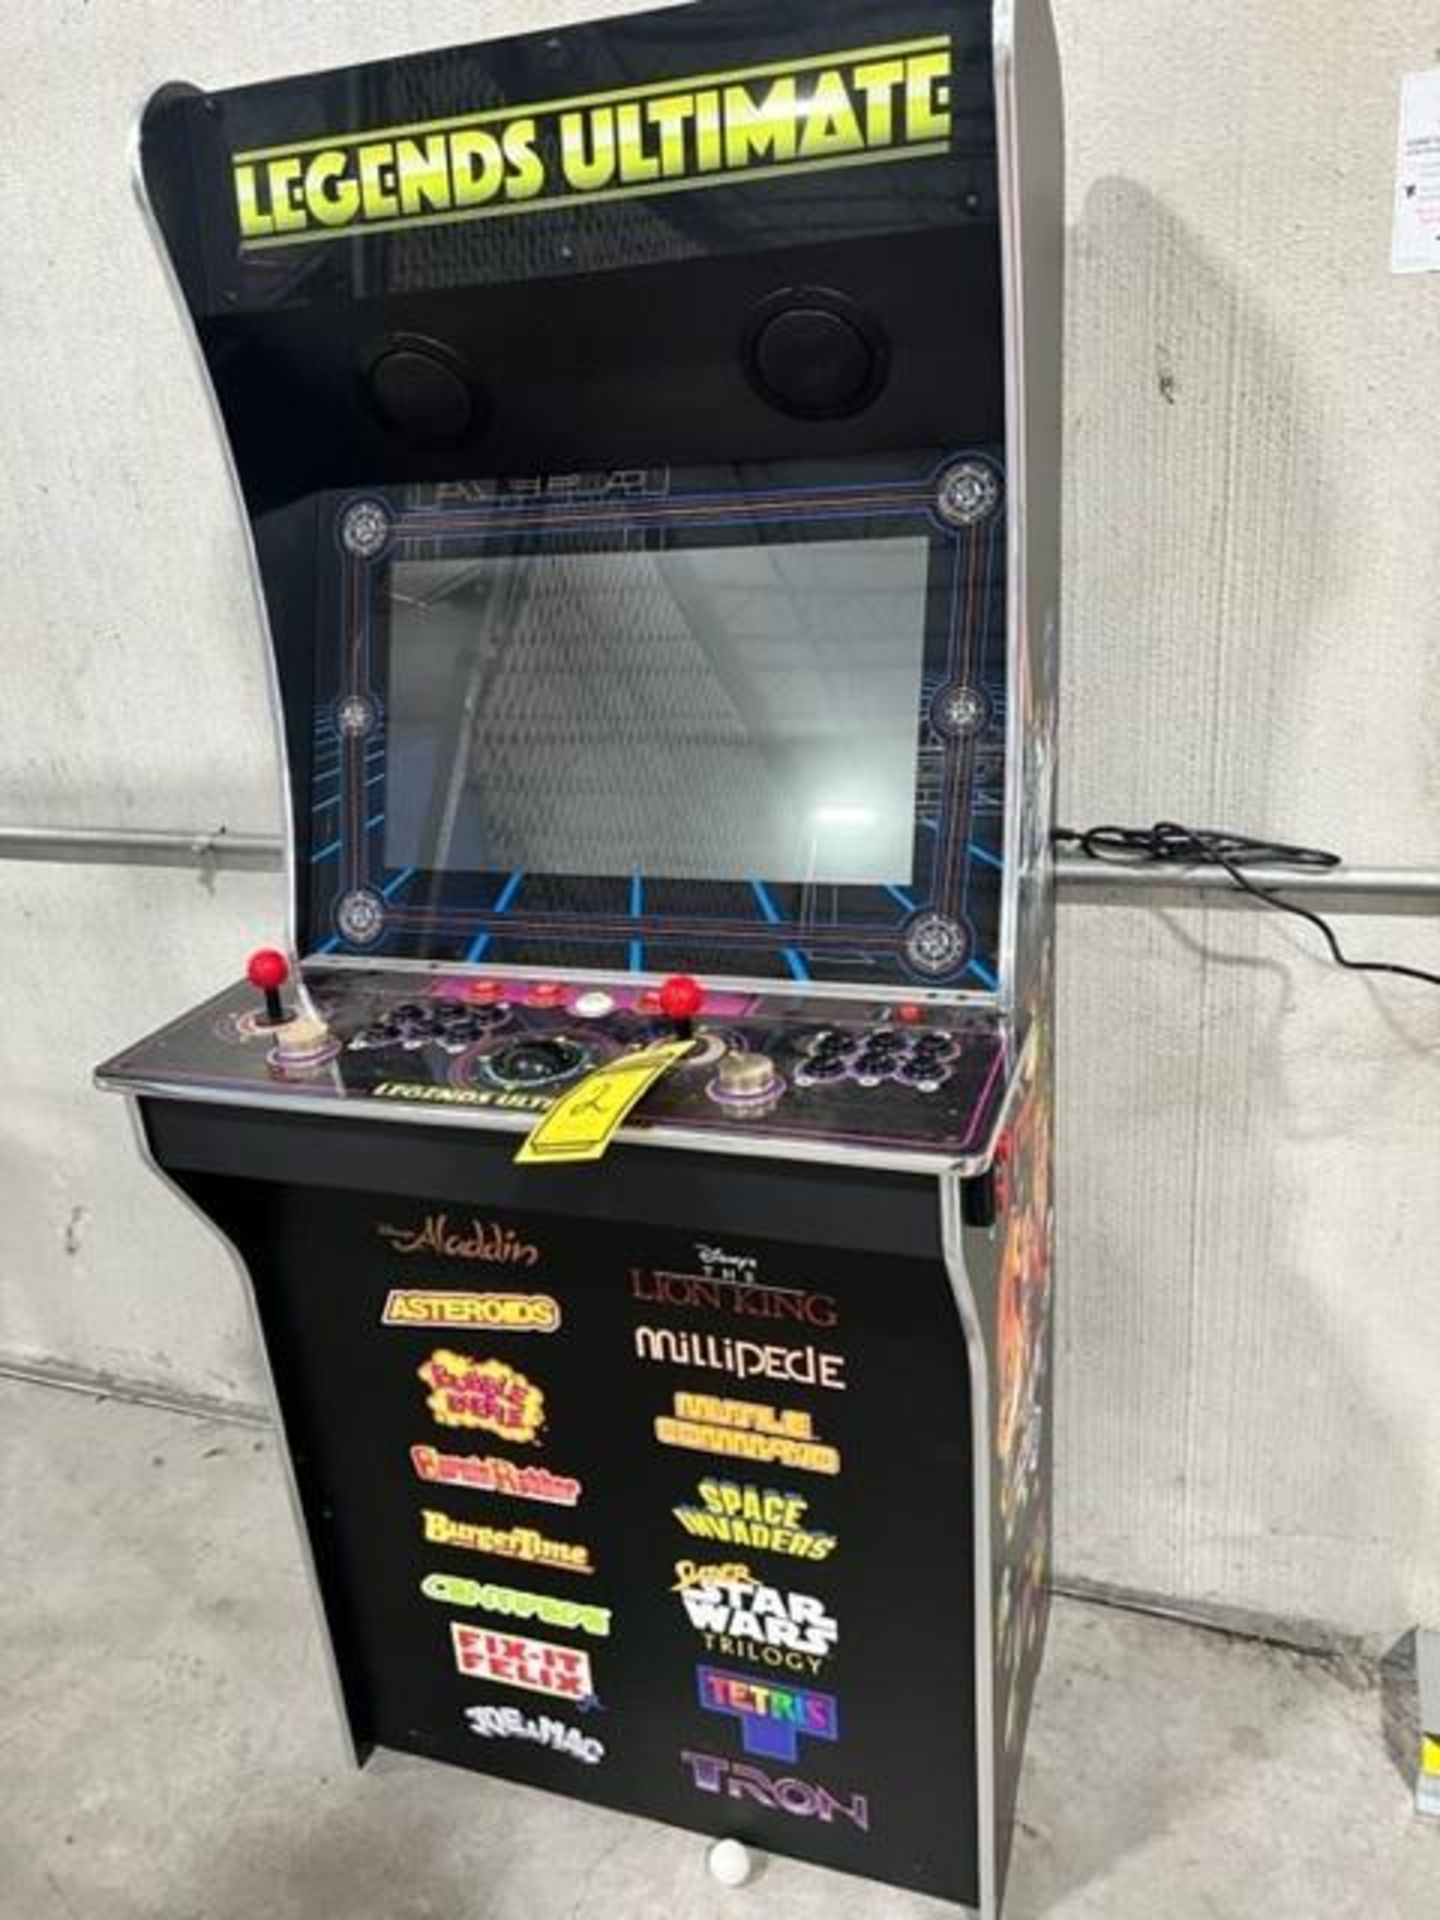 Legends Ultimate Arcade Game ($25 Loading Fee Will Be Added To Invoice) - Image 2 of 3